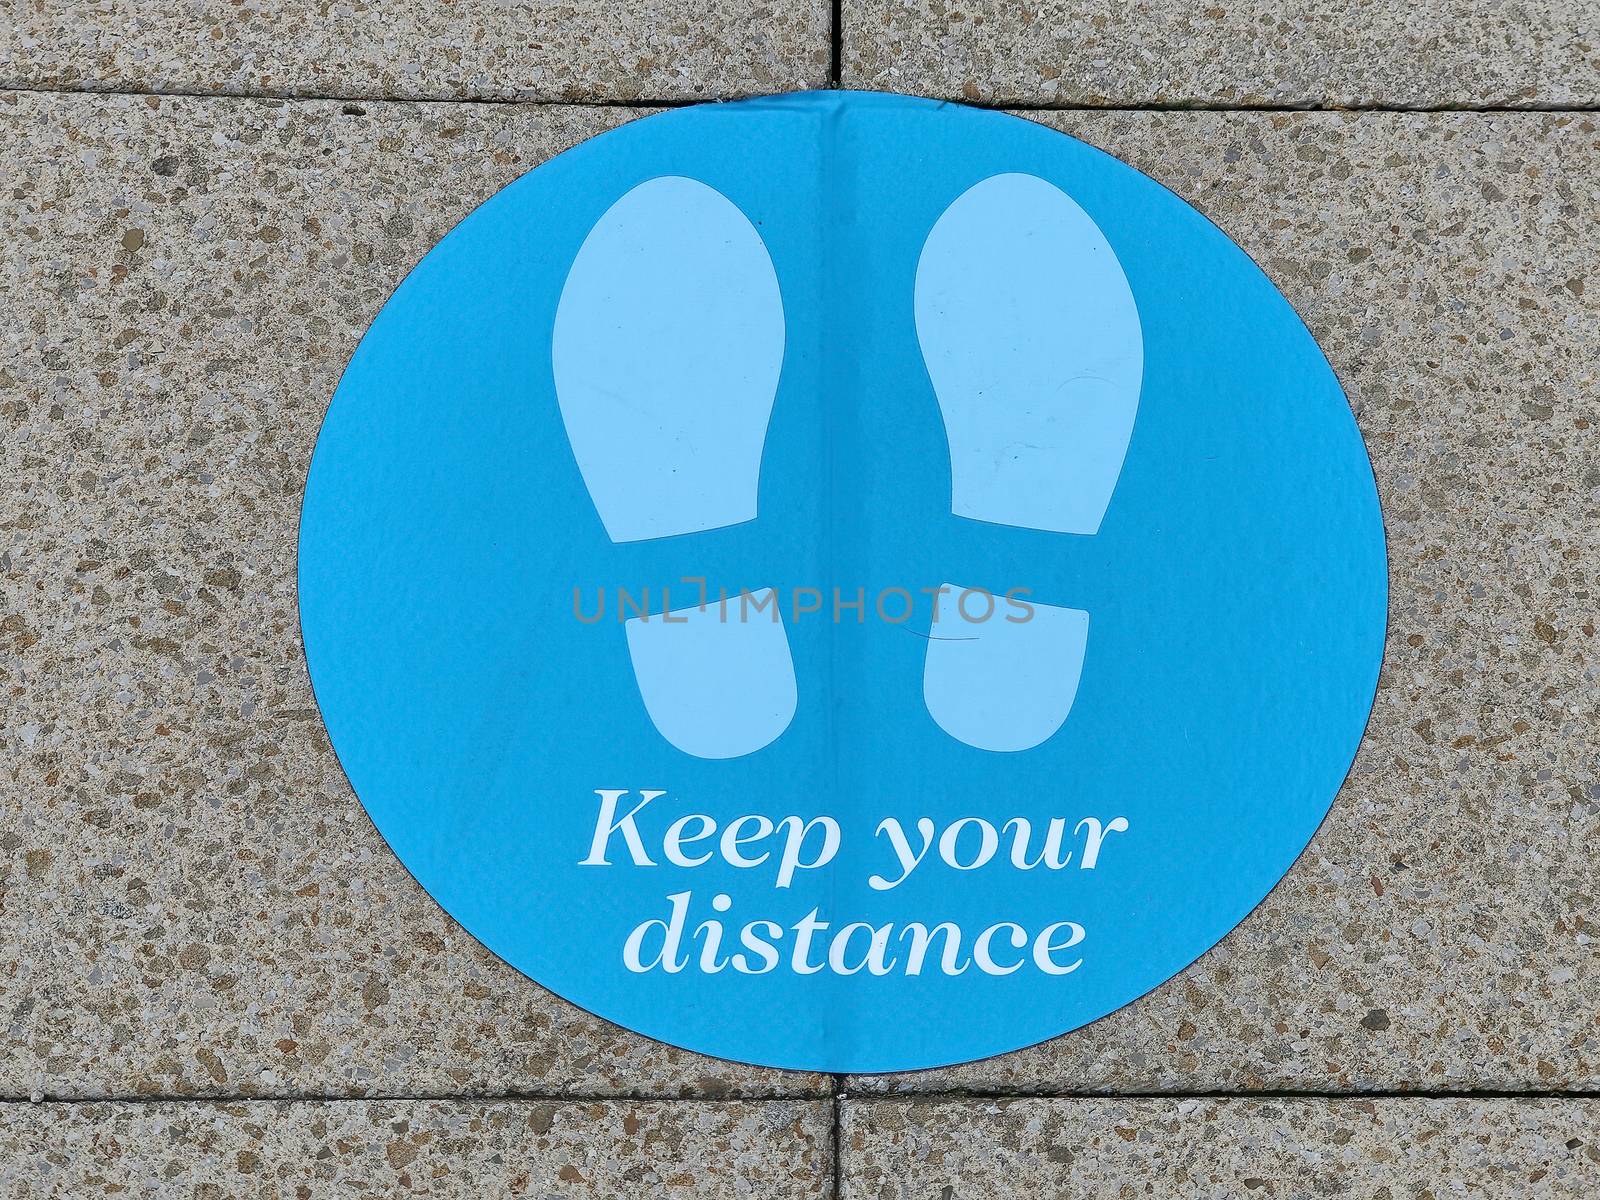 Keep your distance stand here sign on a pavement